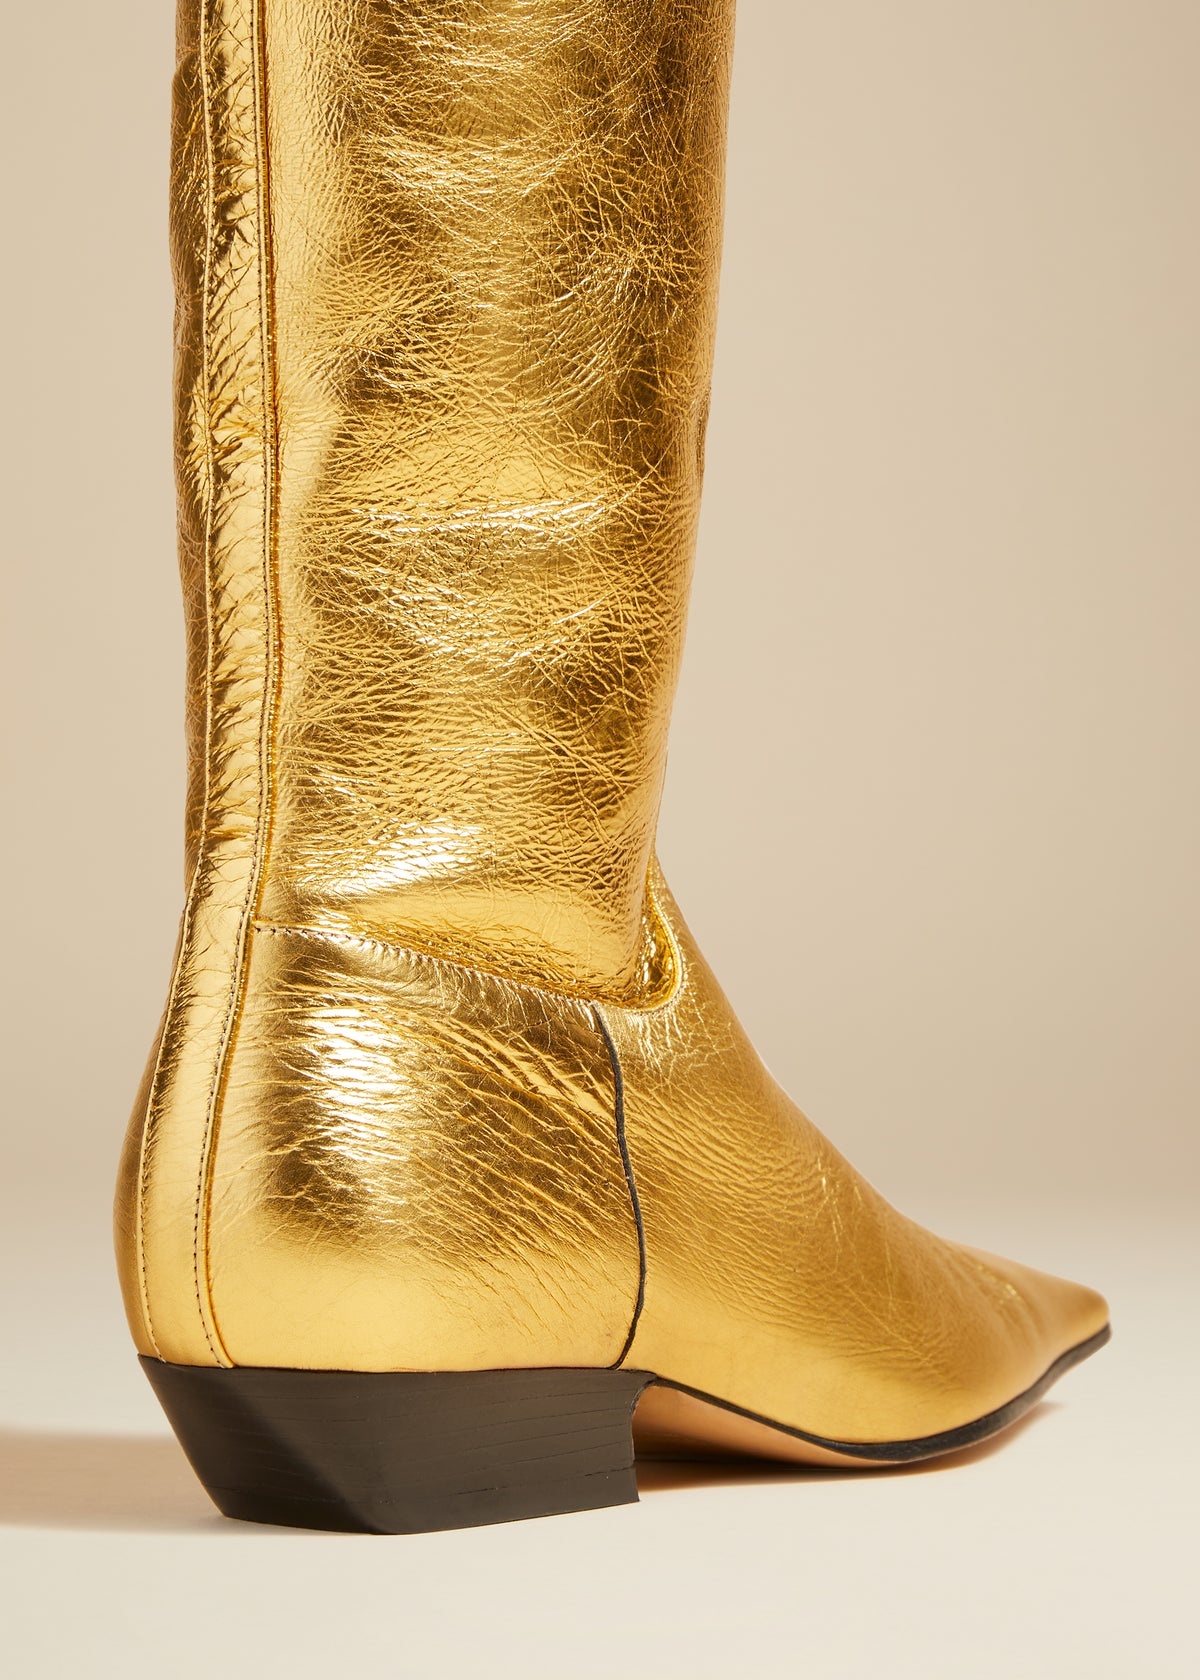 The Marfa Over-the-Knee Flat Boot in Gold Metallic Leather - 3